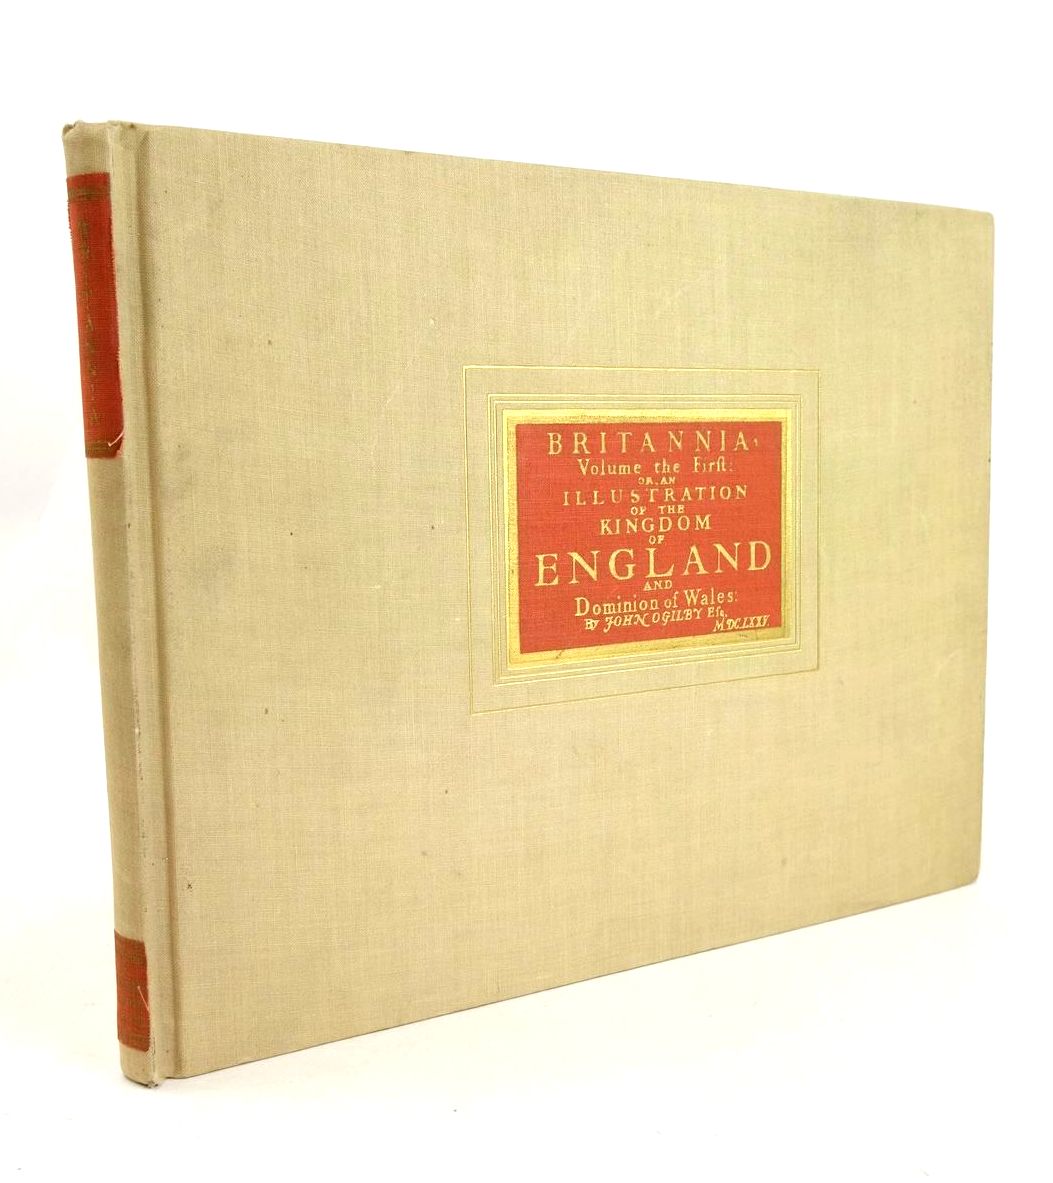 Photo of BRITANNIA, VOLUME THE FIRST: OR, AN ILLUSTRATION OF THE KINGDOM OF ENGLAND AND DOMINION OF WALES written by Ogilby, John illustrated by Ogilby, John published by Alexander Duckham &amp; Co. Ltd. (STOCK CODE: 1327823)  for sale by Stella & Rose's Books